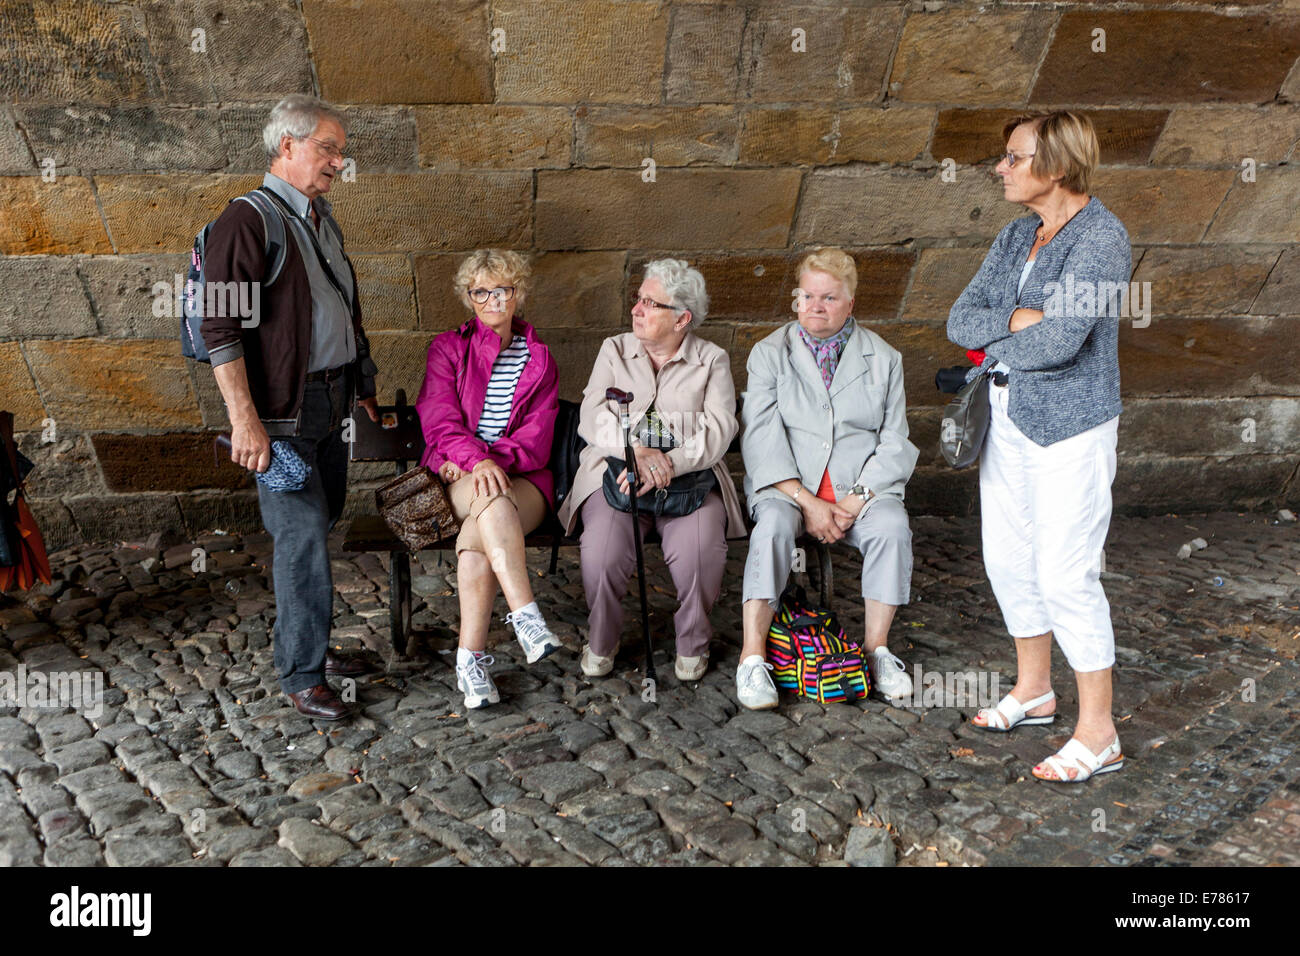 Tired elderly people, tourists, relaxation, pensioners on the bench bellow Charles Bridge, Prague, Czech Republic Stock Photo